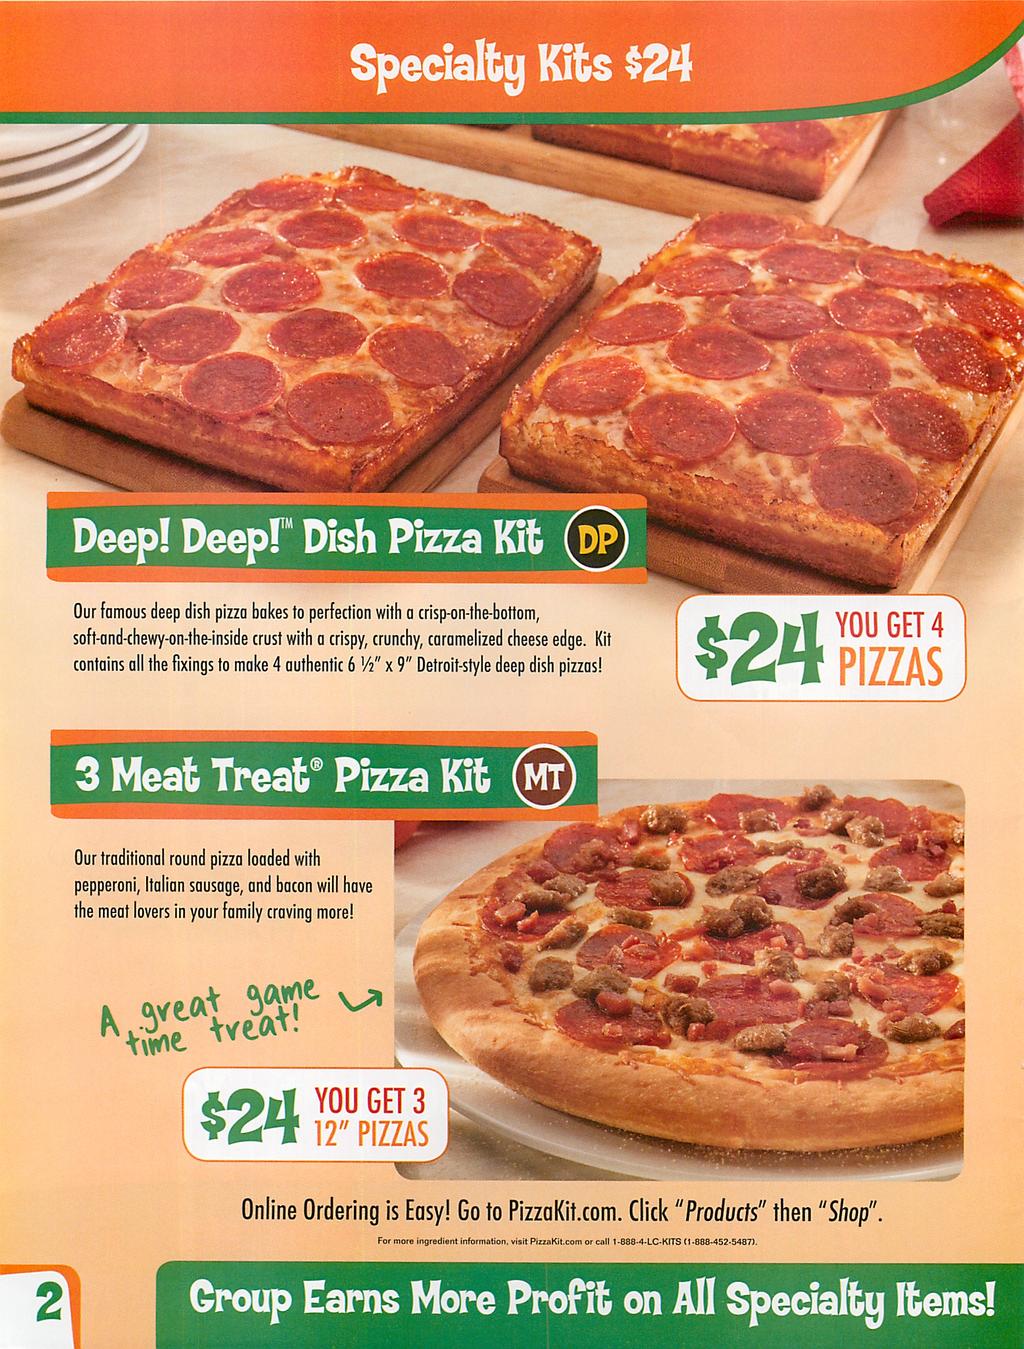 ecialtu Kits $24 Our famous deep dish pizza bakes to perfection with acrisp-on-the-bottom, soft-and-chewy-on-the-inside crust with acrispy, crunchy, caramelized cheese edge.